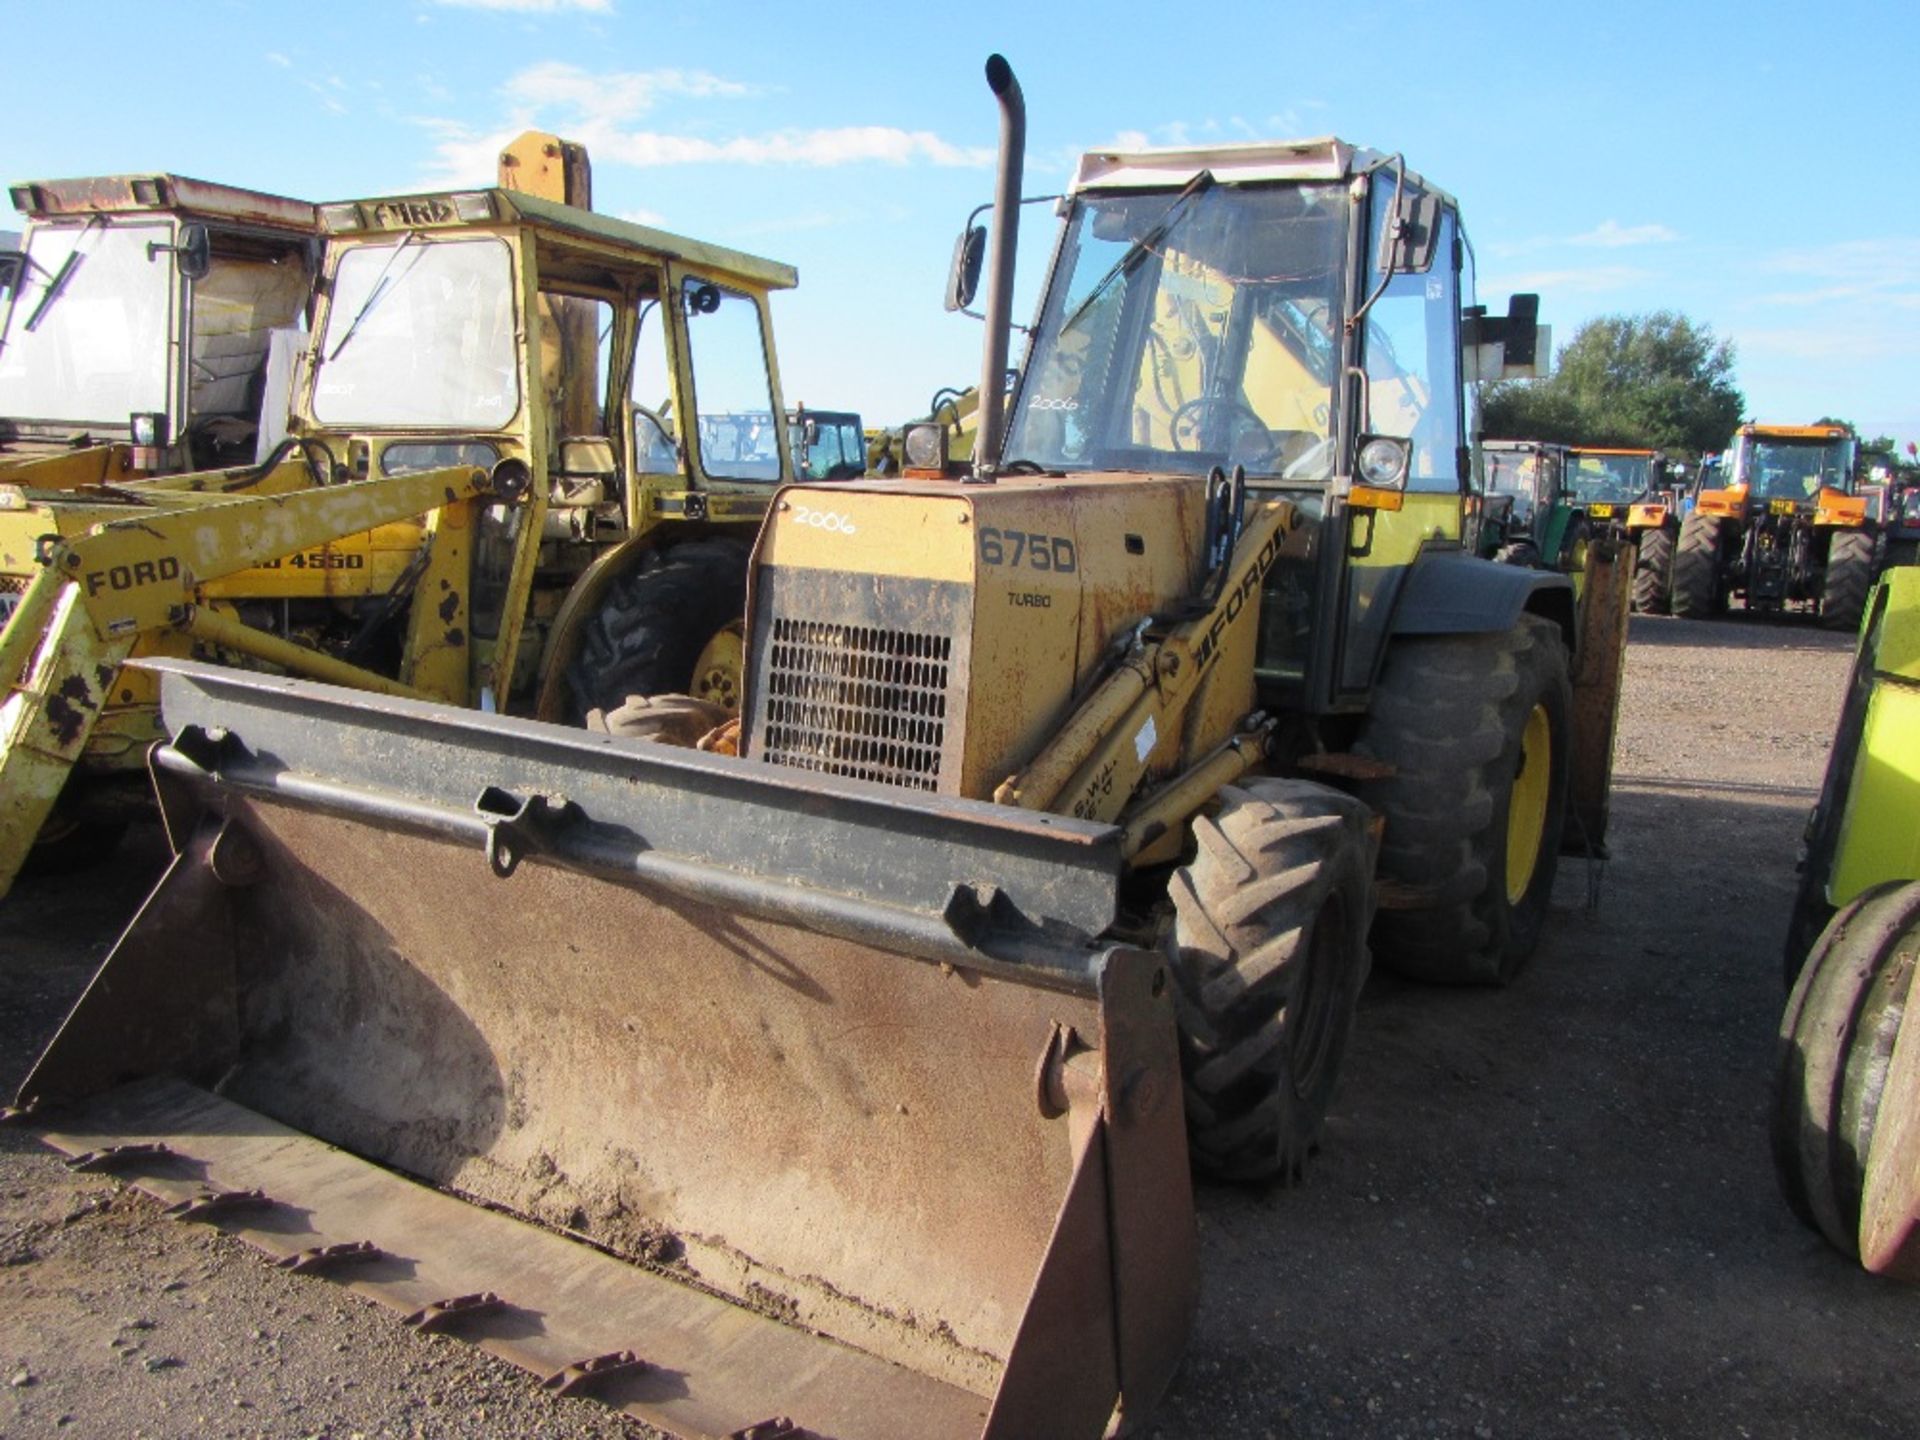 1993 Ford 675D 4wd Digger Loader with 4 in 1 Front Bucket & Extra Dig Reg. No. L954 WCS Ser No